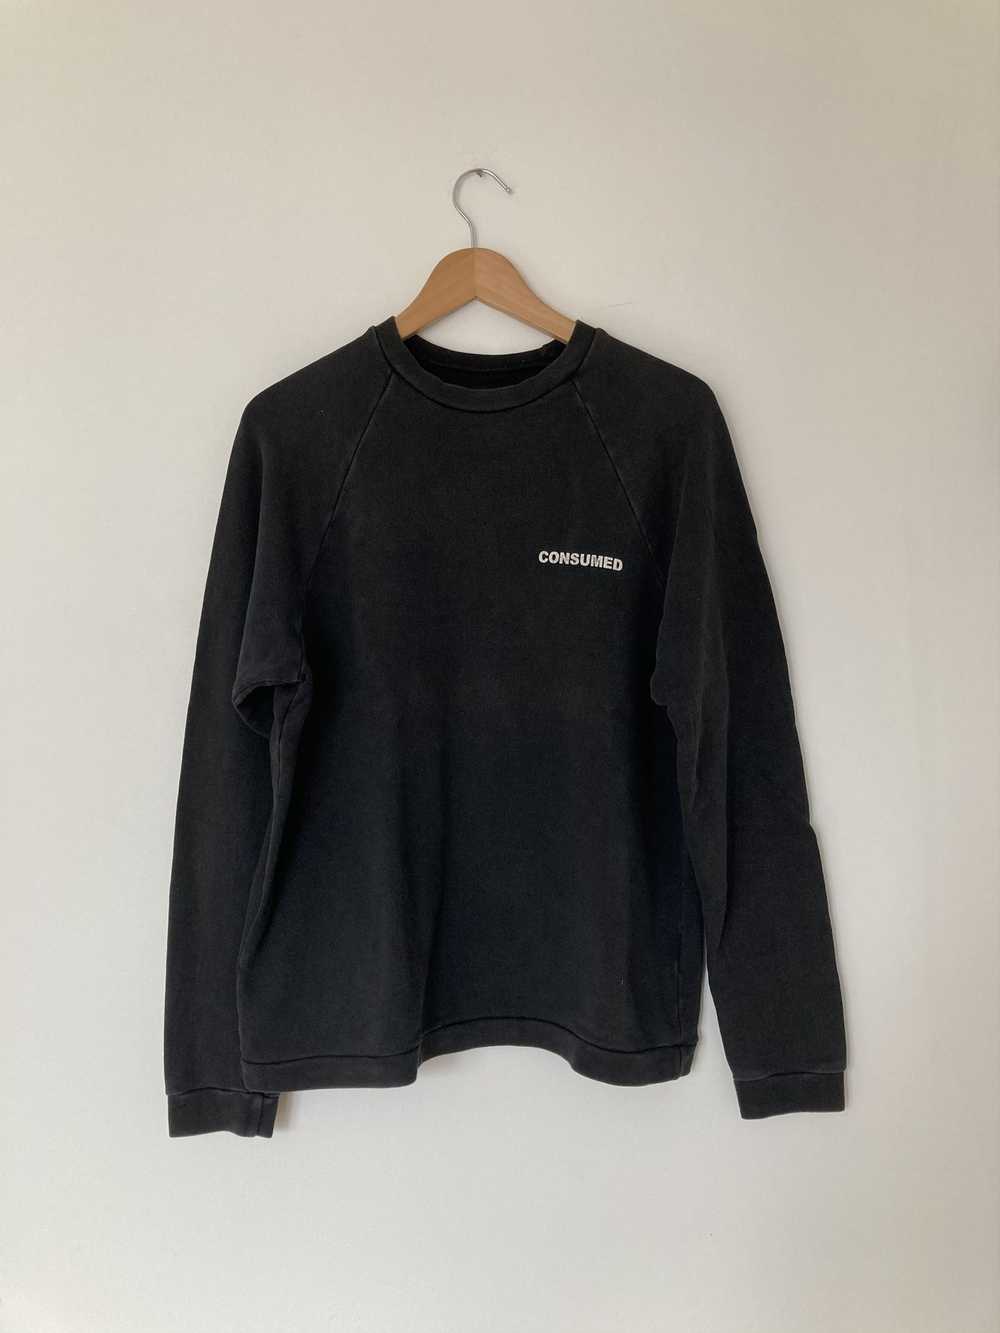 Raf Simons Raf SS03 Consumed "Commodity" sweater - image 2